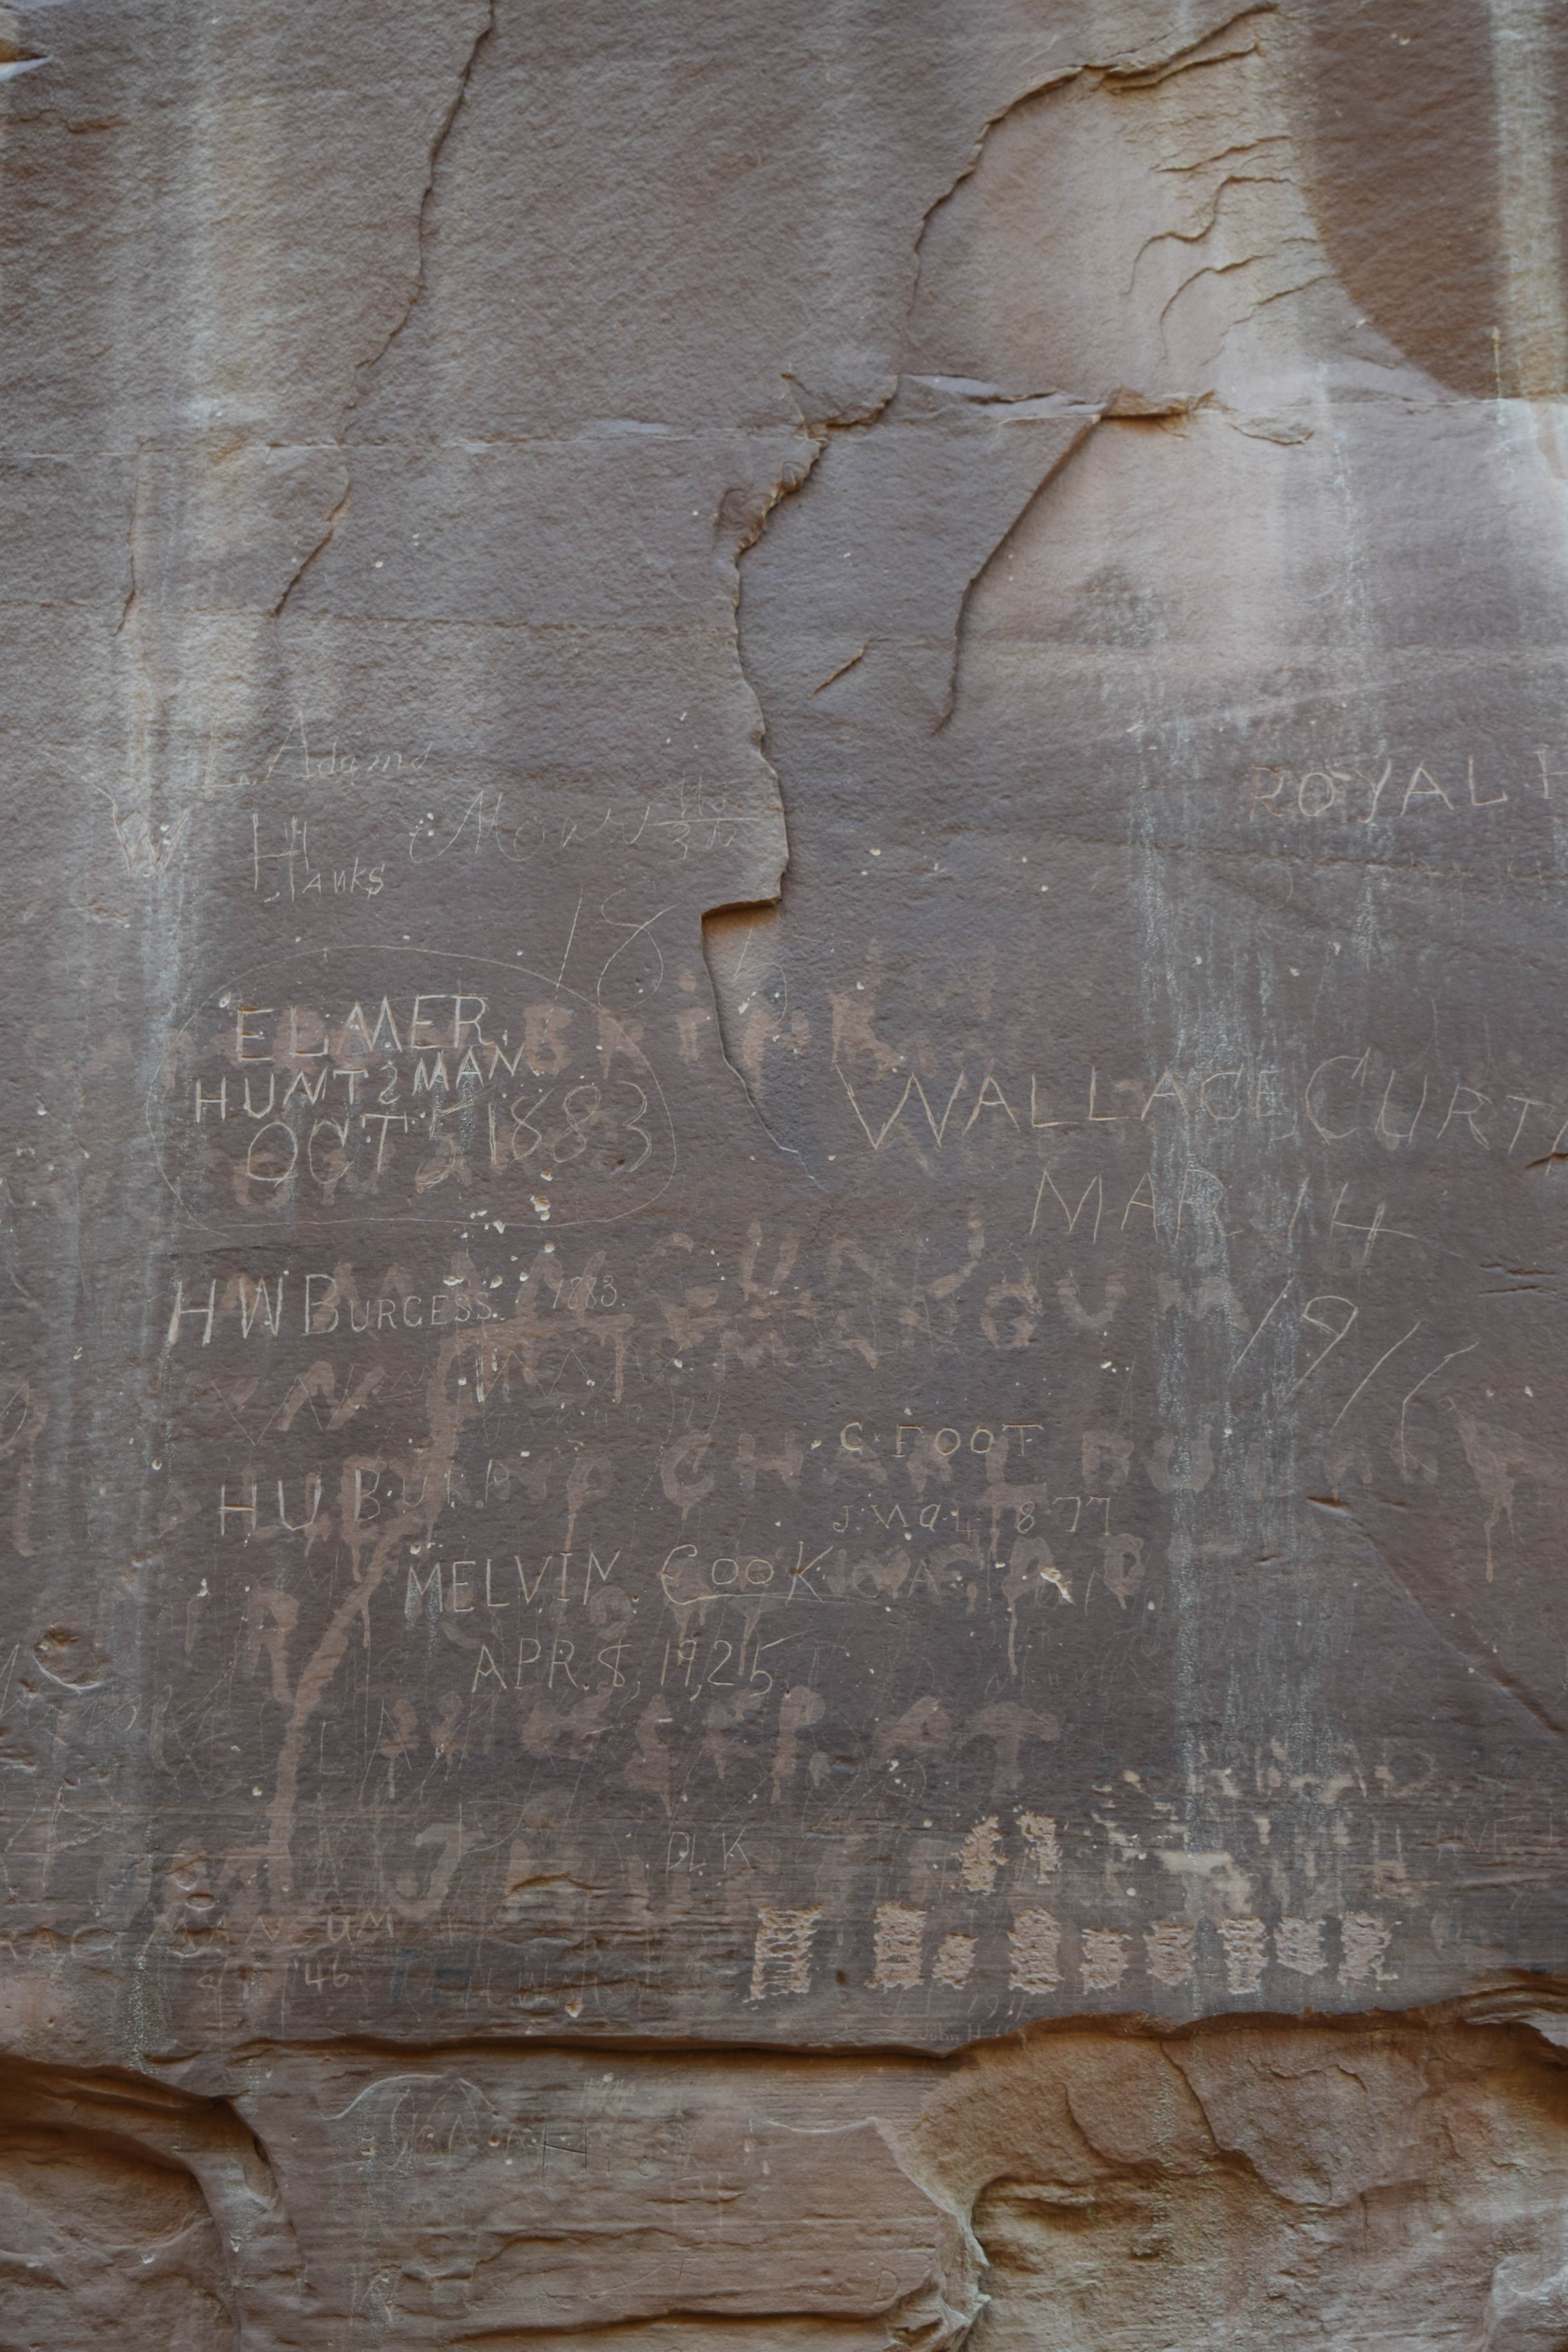 Register of Pioneers -  Mormon pioneers traveling through carved their names into the rock and the canyon soon came to resemble a guestbook or "register".  Some of the names inscribed are more than 125 years old